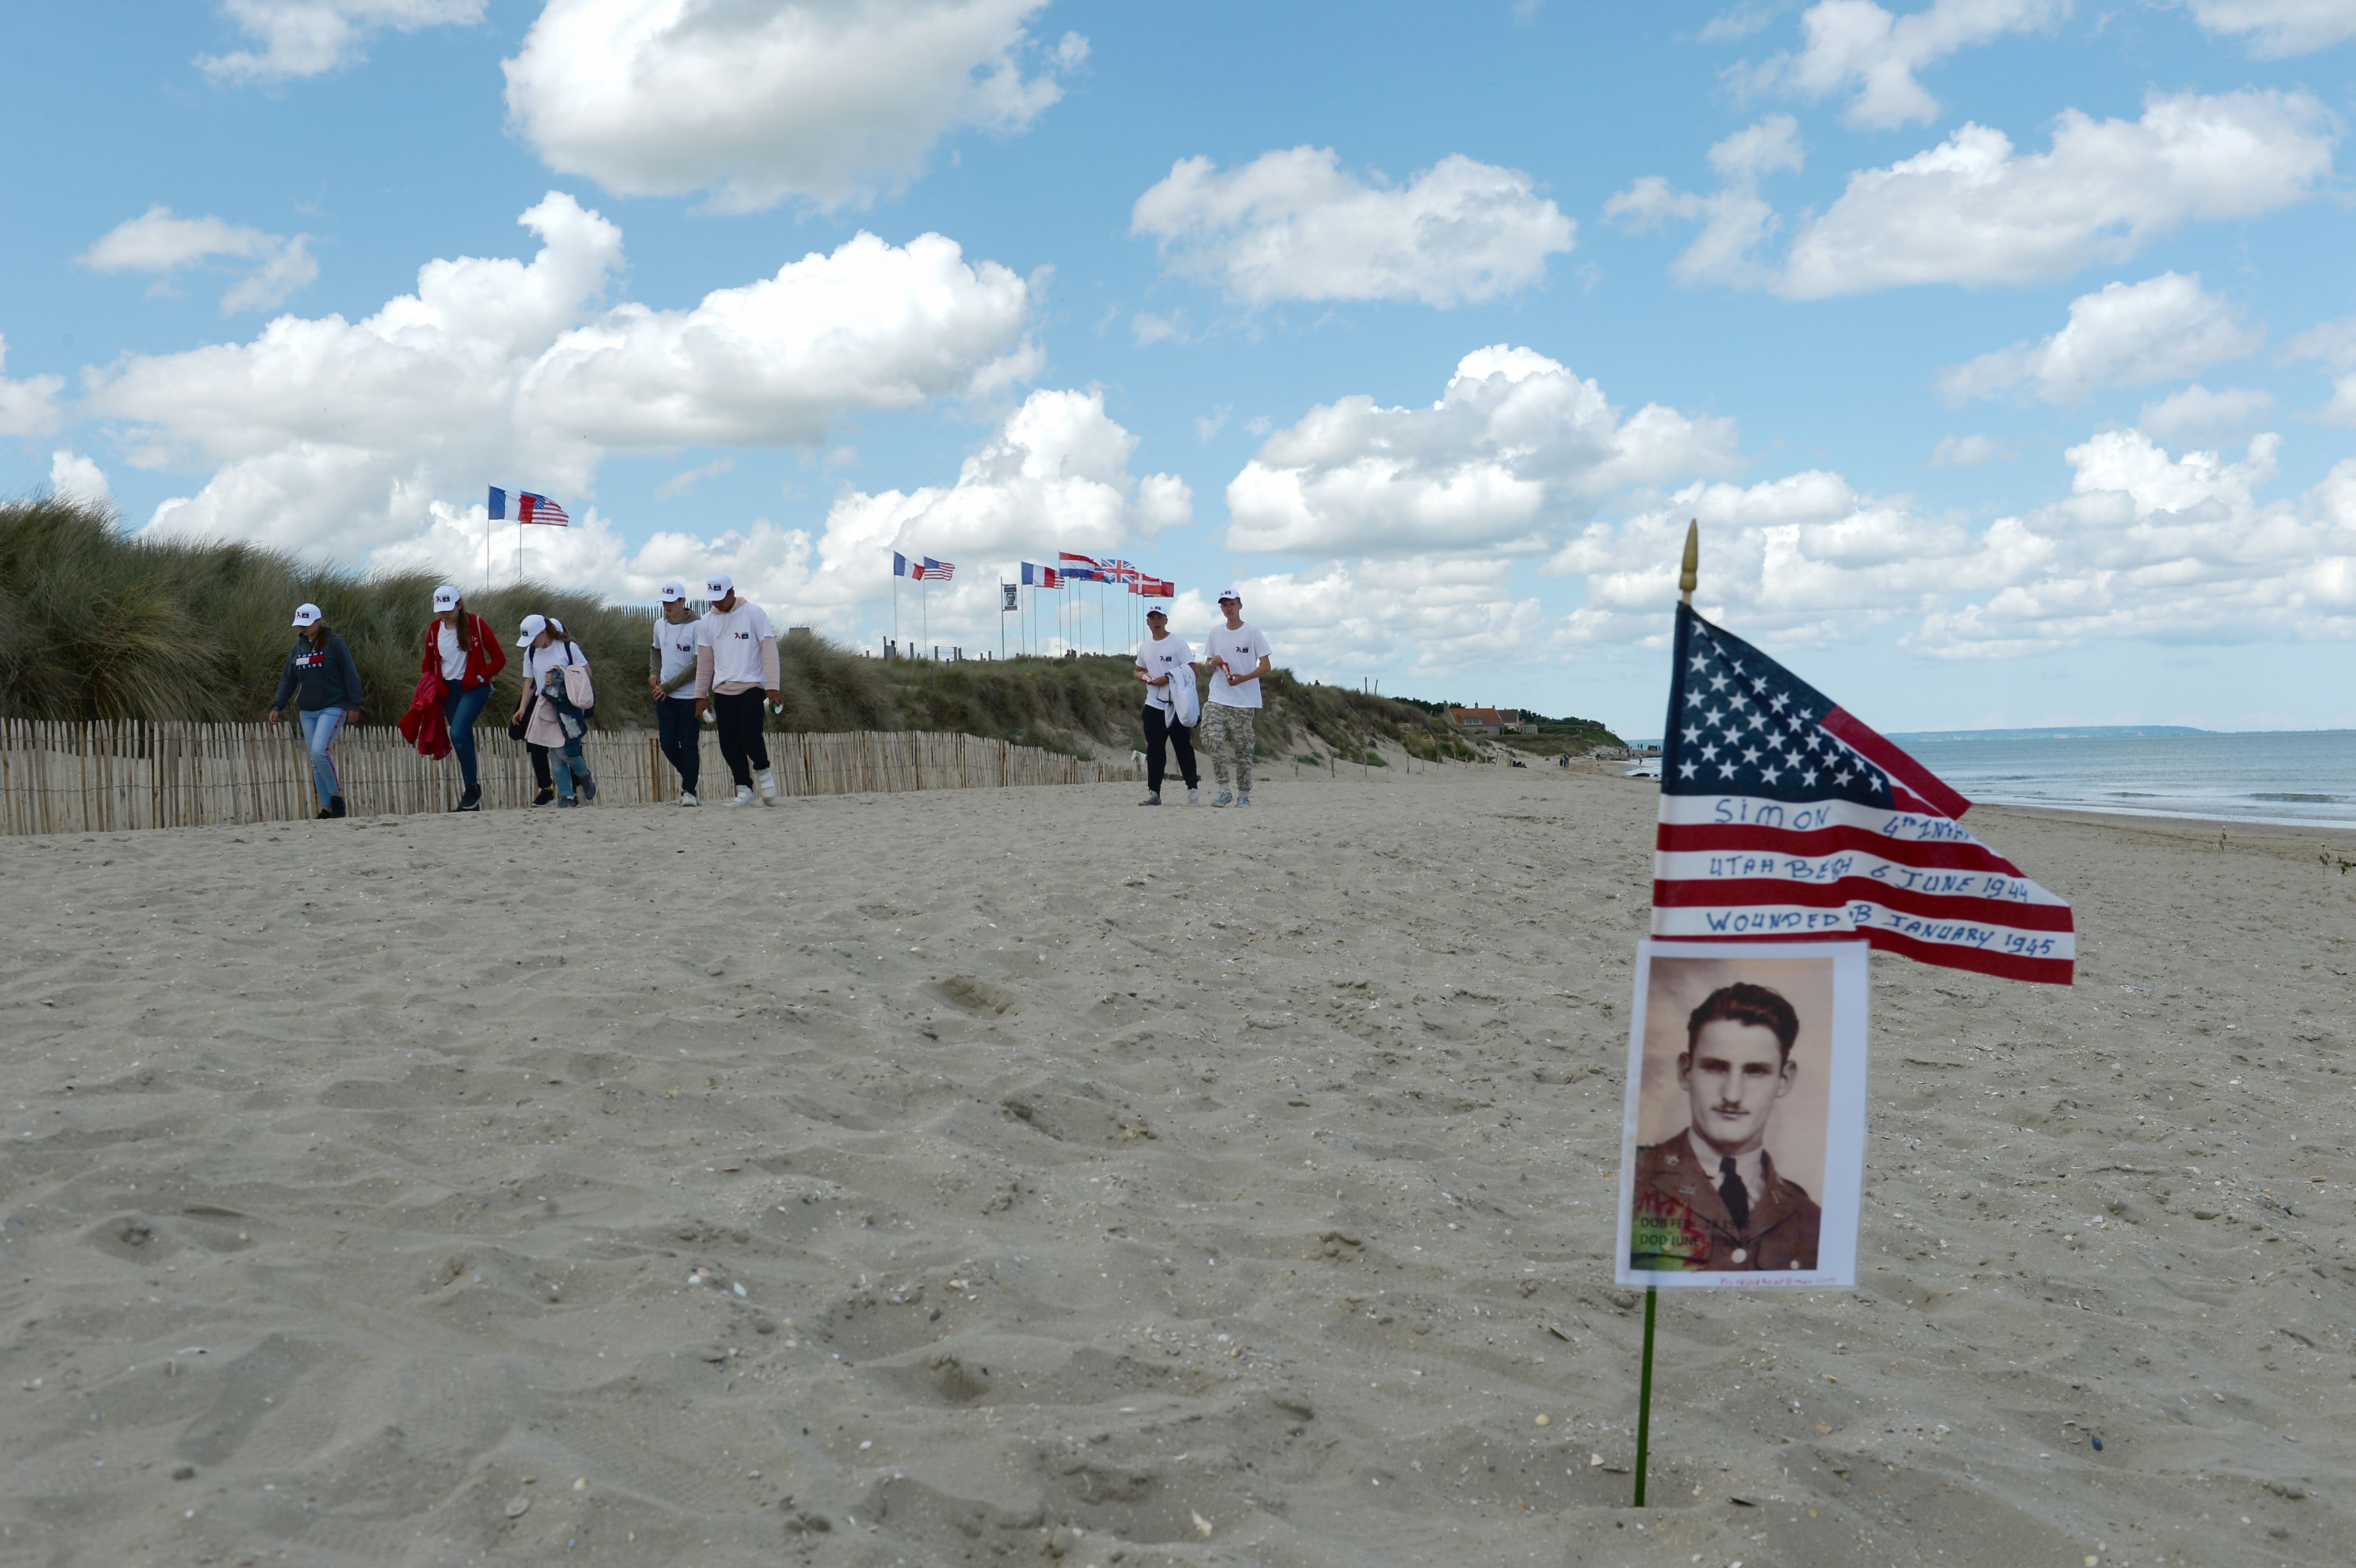 DVIDS - Images - DDay 78th Anniversary: 4th Infantry Division honored in  WWII commemoration [Image 4 of 10]